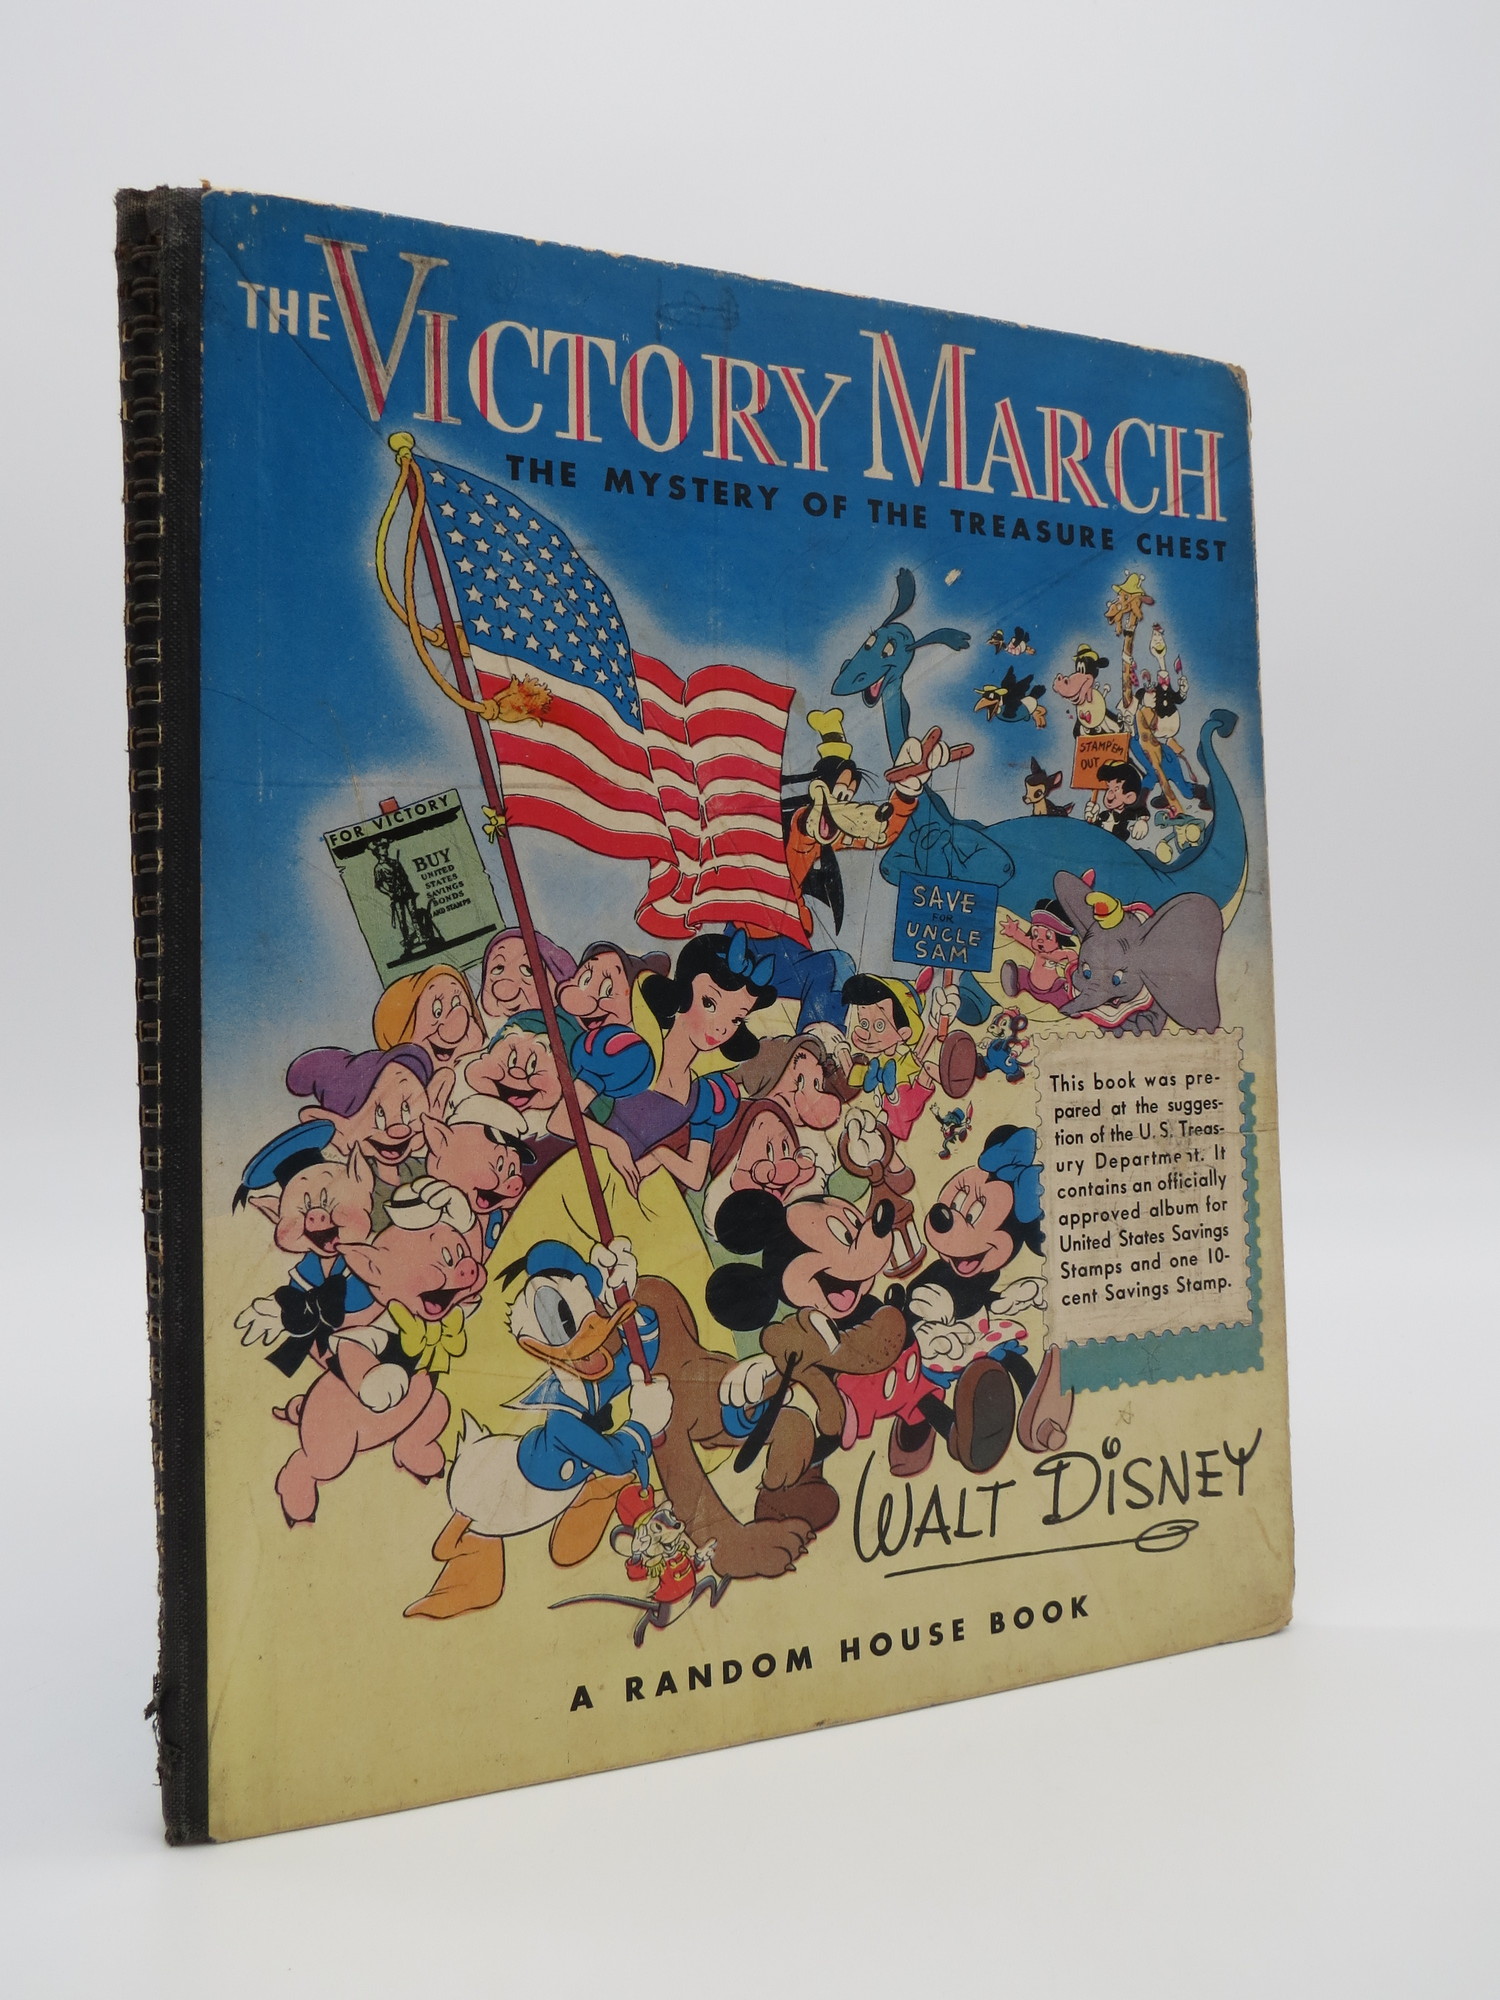 THE VICTORY MARCH; OR THE MYSTERY OF THE TREASURE CHEST [MOVEABLE BOOK]